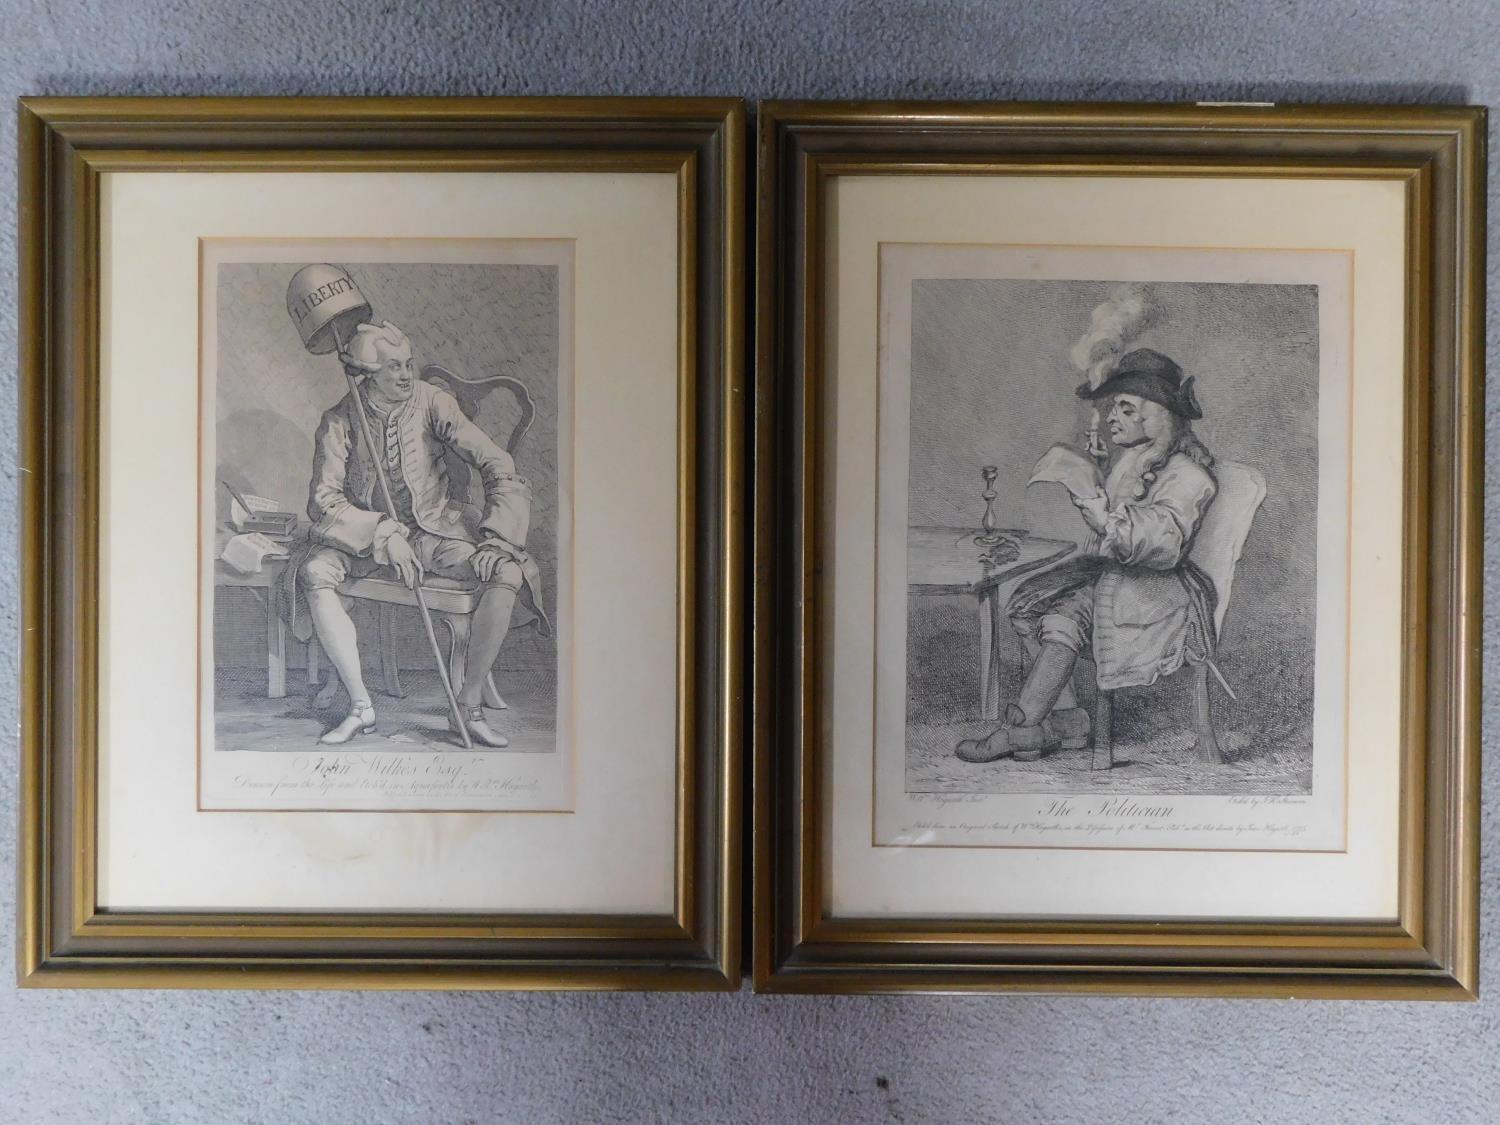 Two framed and glazed lithographs, one of John Wilkes Esq. and the other titled 'The Politician'.